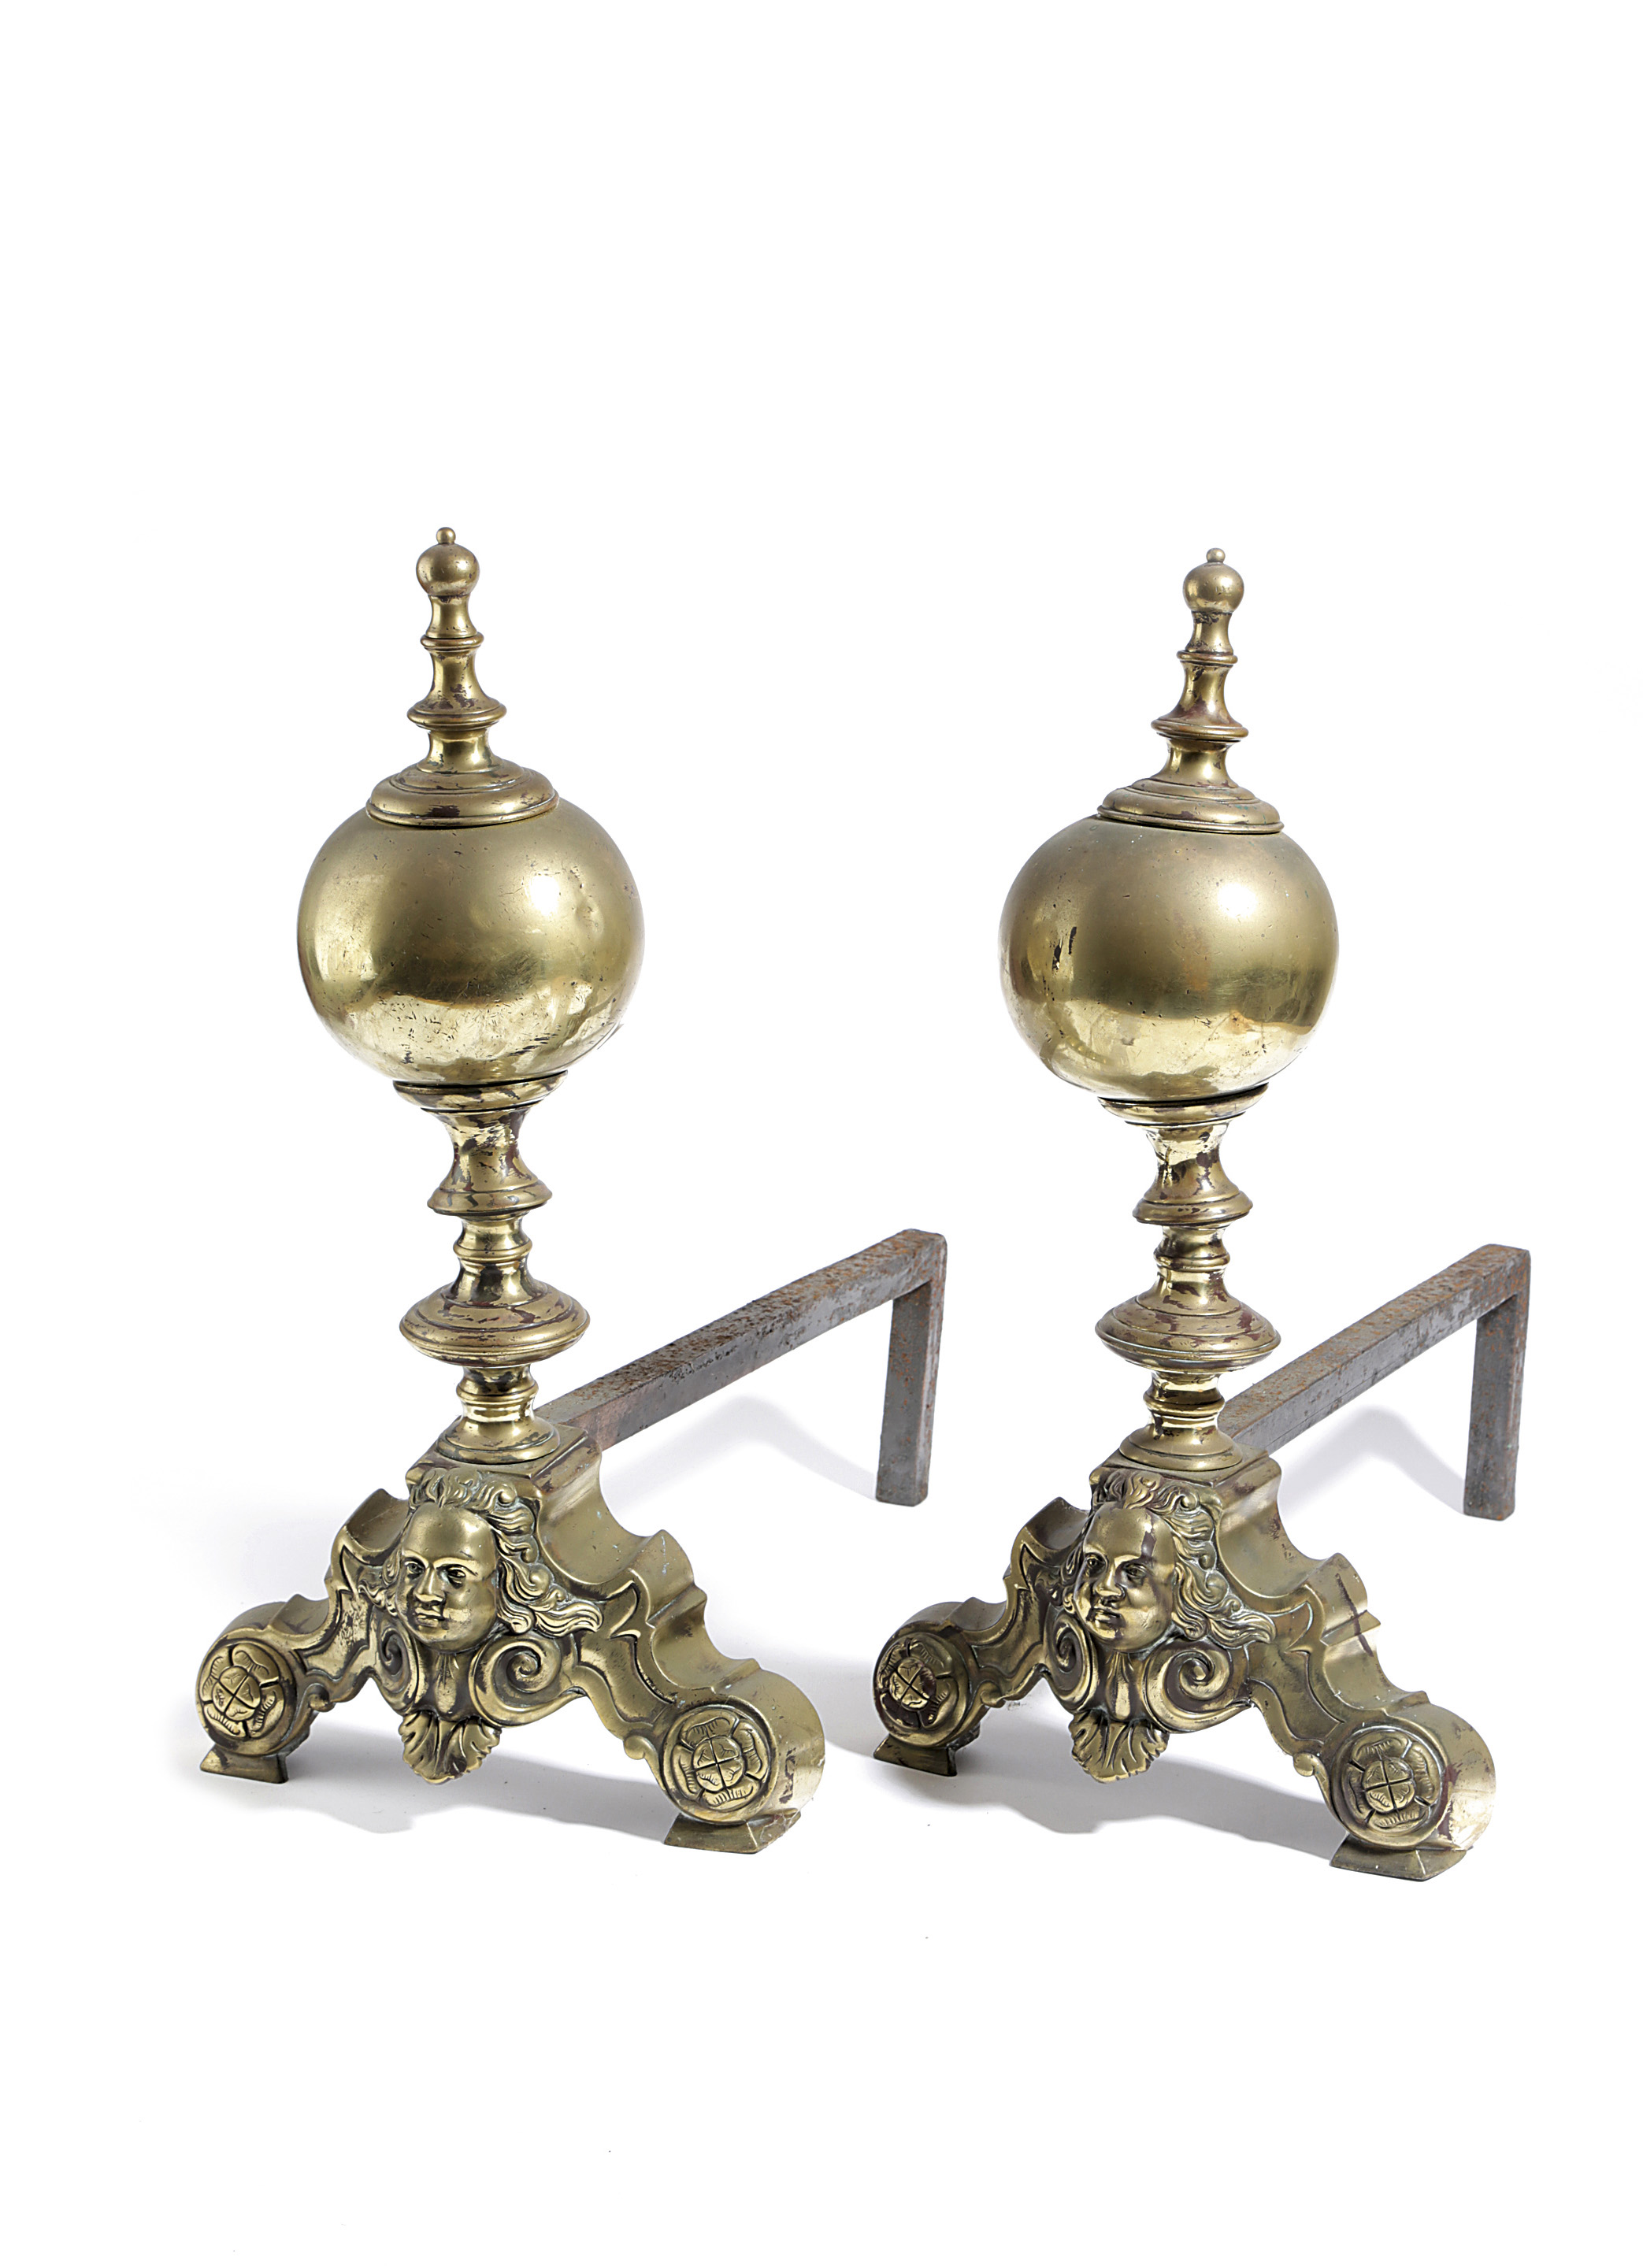 A PAIR OF DUTCH BRASS ANDIRONS IN BAROQUE STYLE, 19TH CENTURY each with turned and ball